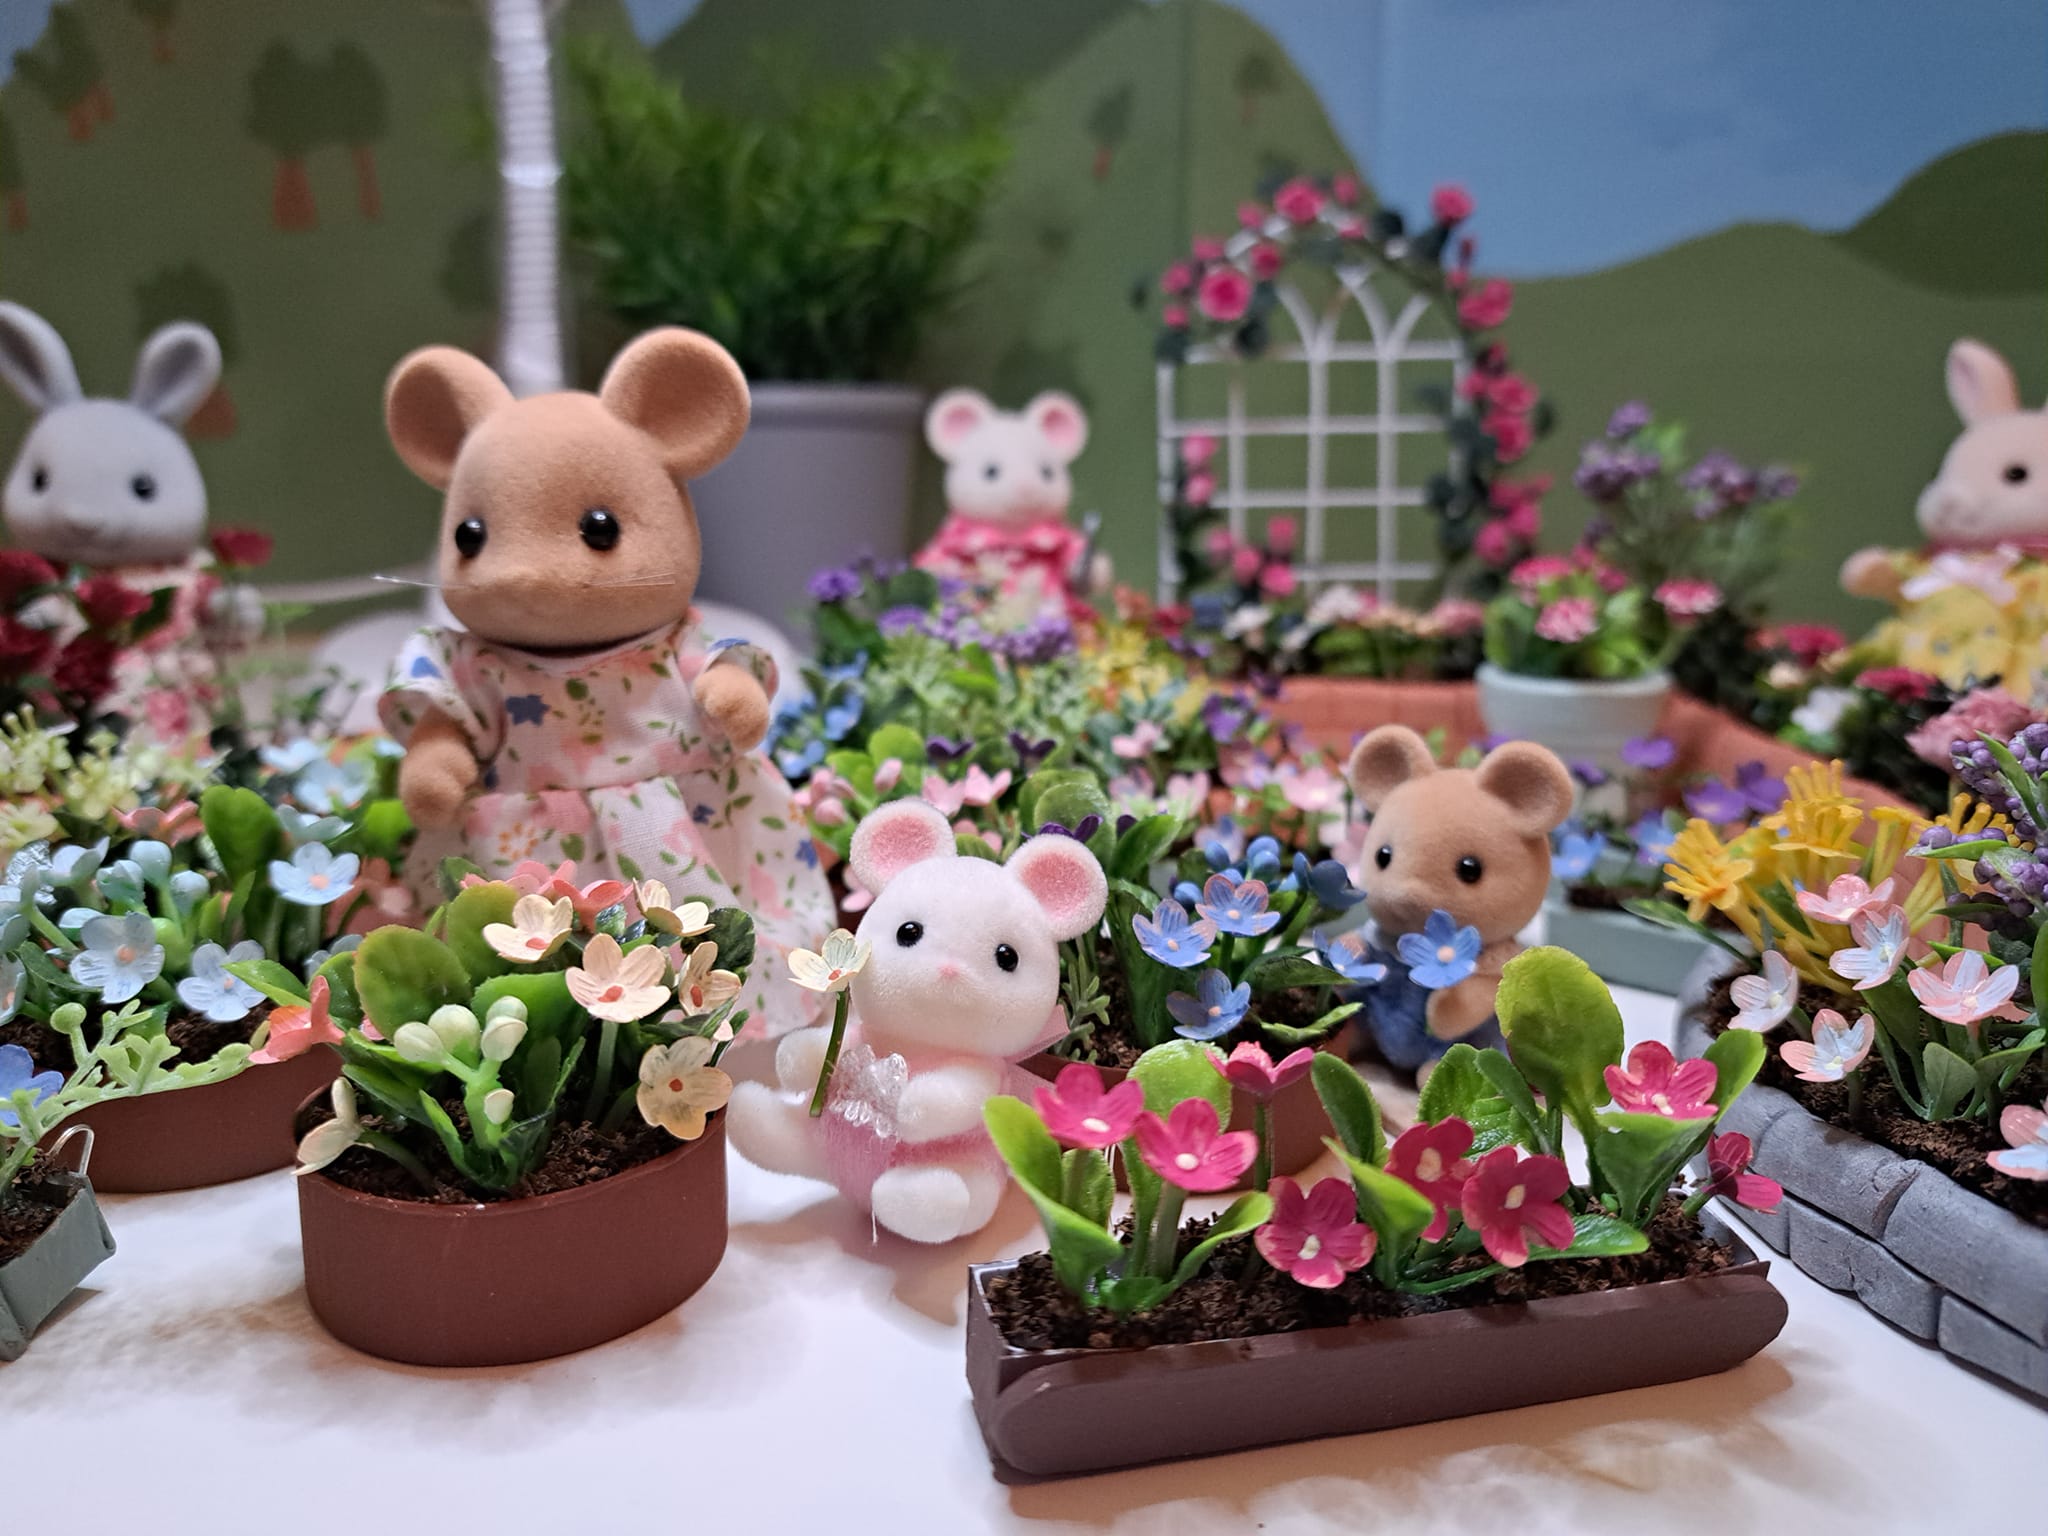 Lots of DIY flower beds and window boxes along with a few Calico Critters lounging around.